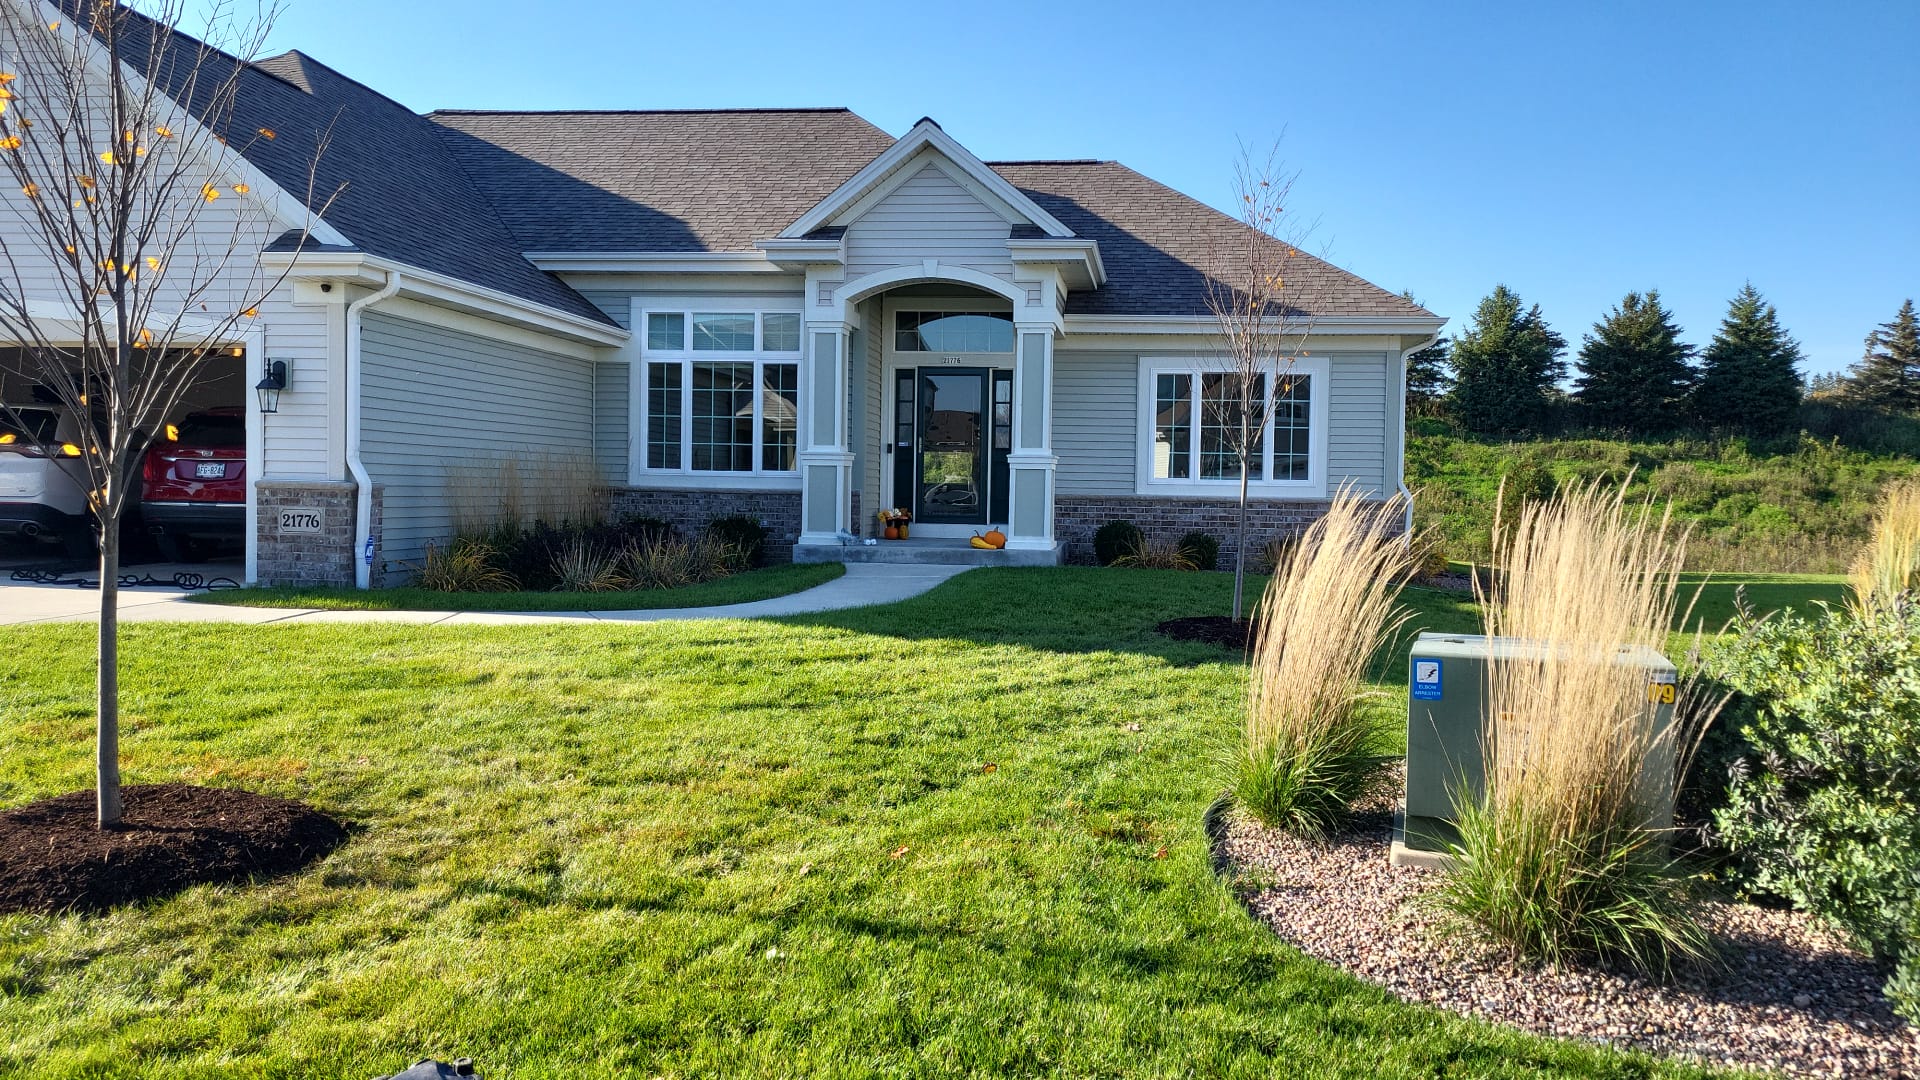 This image shows a single-story suburban home with beige siding, a garage, green lawn, and ornamental grasses, under a clear blue sky.